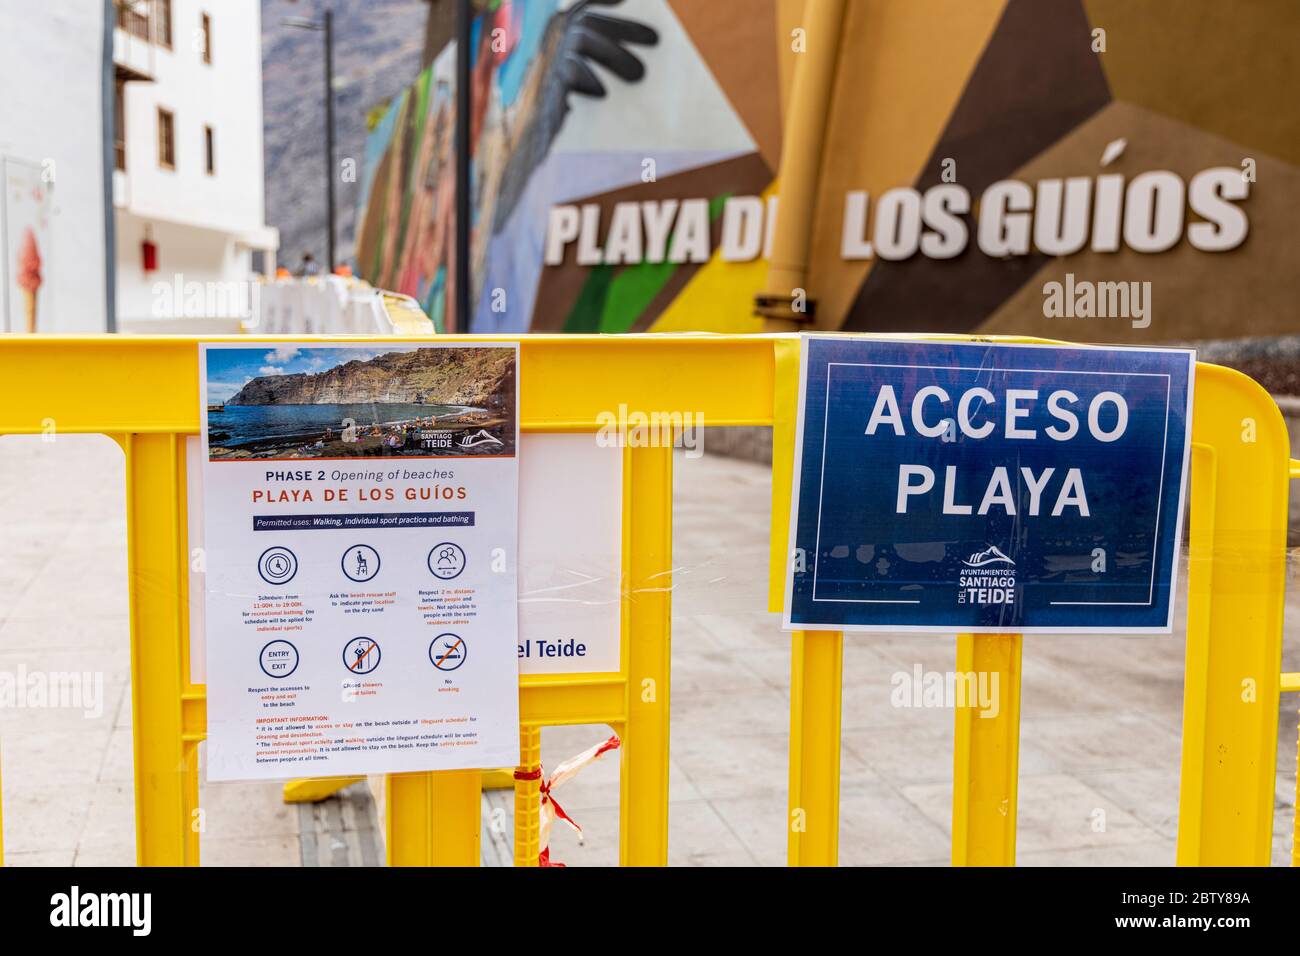 Playa de los Guios, Los Gigantes, Santiago del Teide, Tenerife, Canary Islands, Spain. 28 May 2020. Controlled access for users of the beach during Phase two of de-escalation of the Covid 19, coronavirus state of emergency. Stock Photo